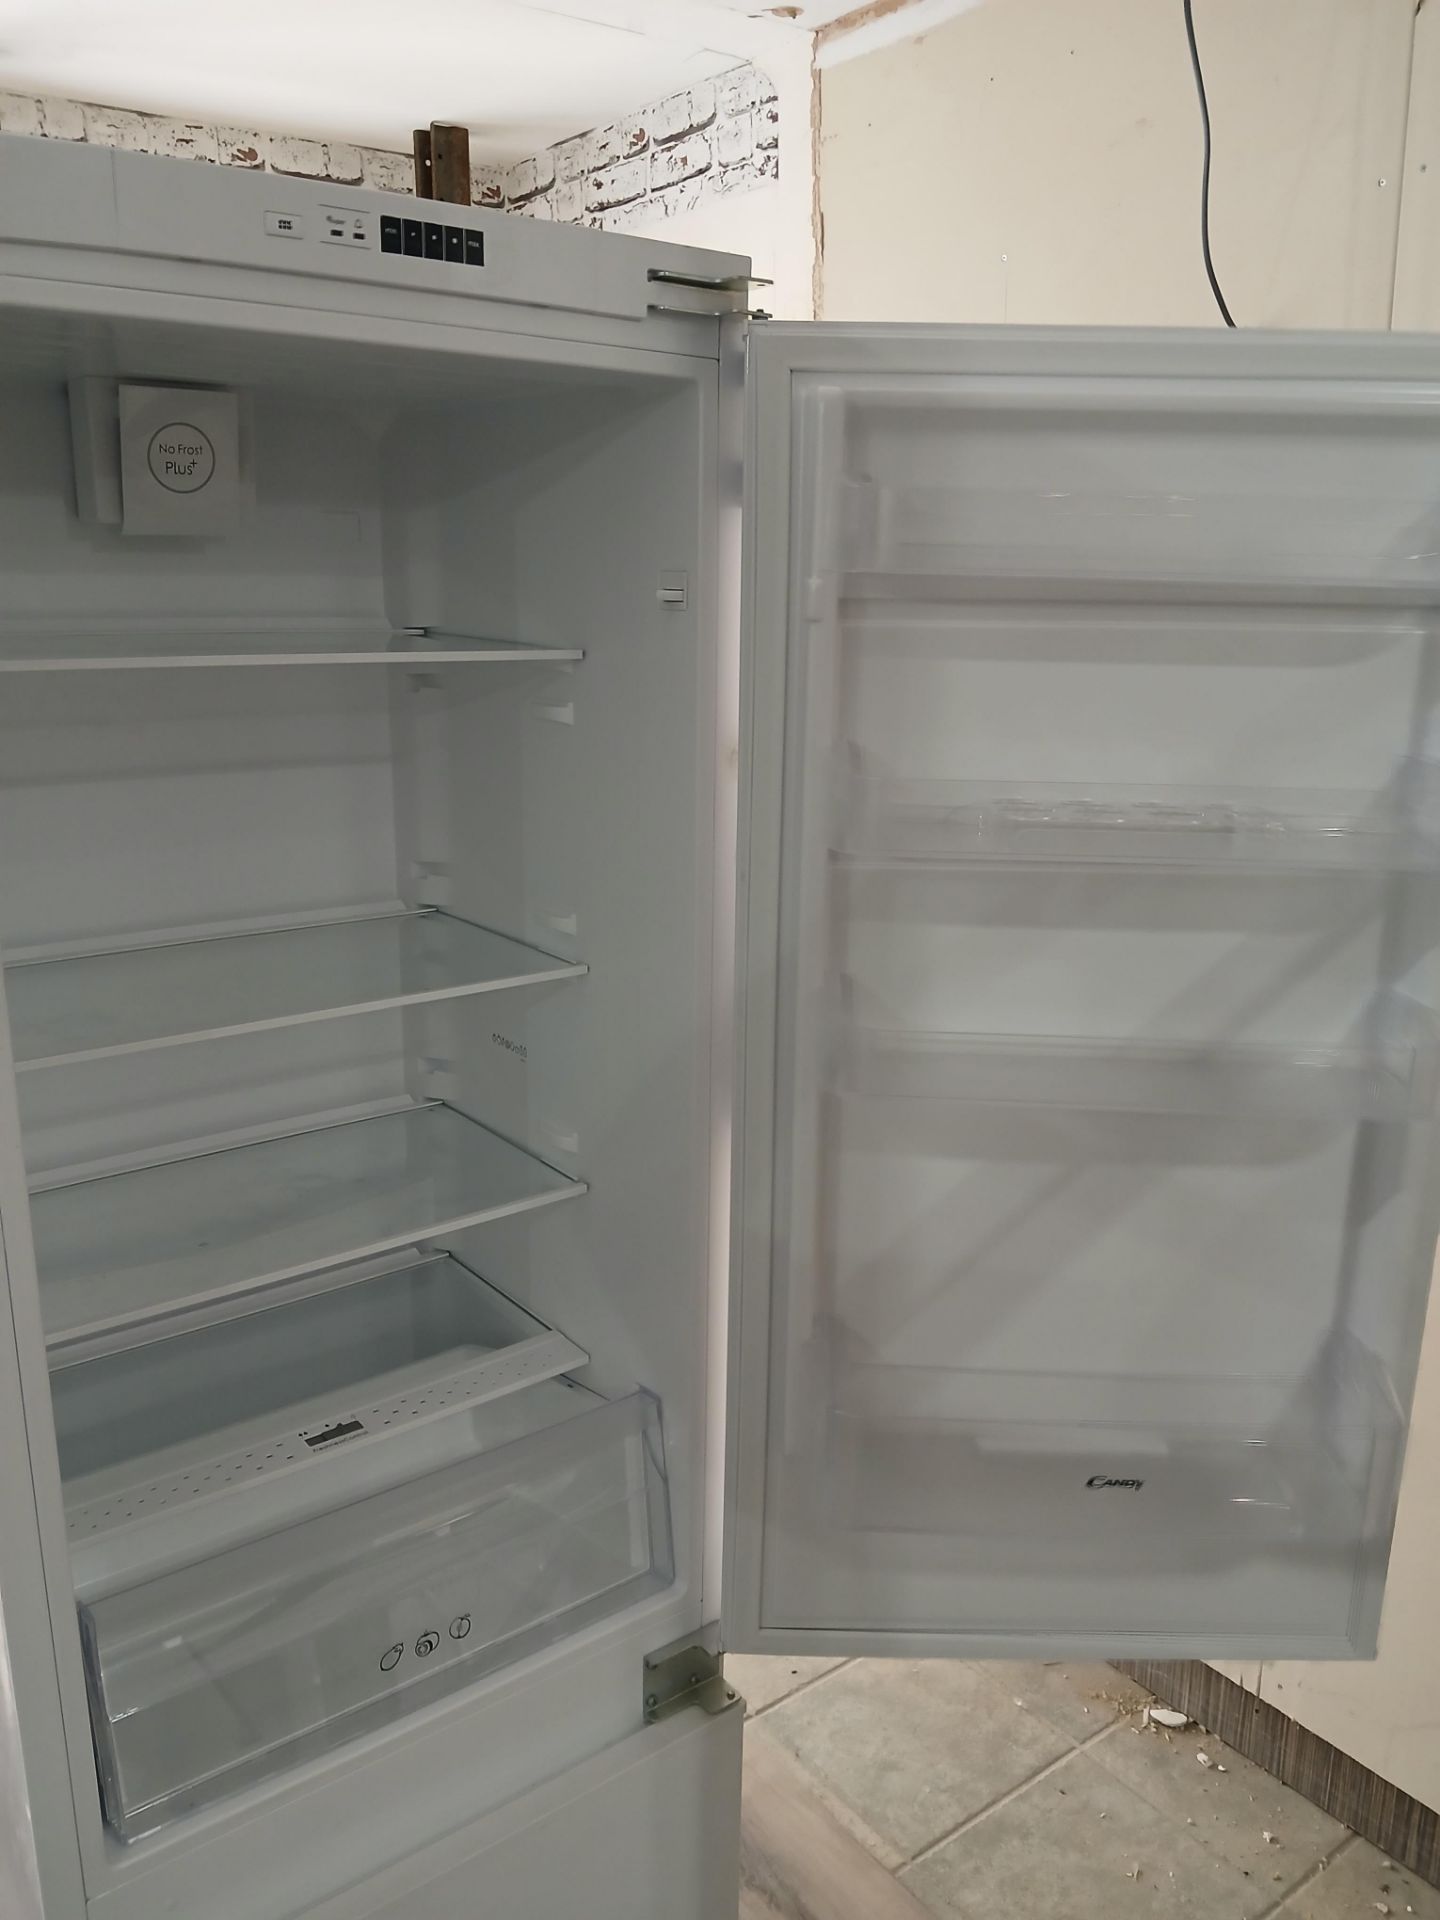 Candy BCBF 174 FTK/N Integrated Fridge Freezer (Please note, Viewing Strongly Recommended - Eddisons - Image 4 of 5